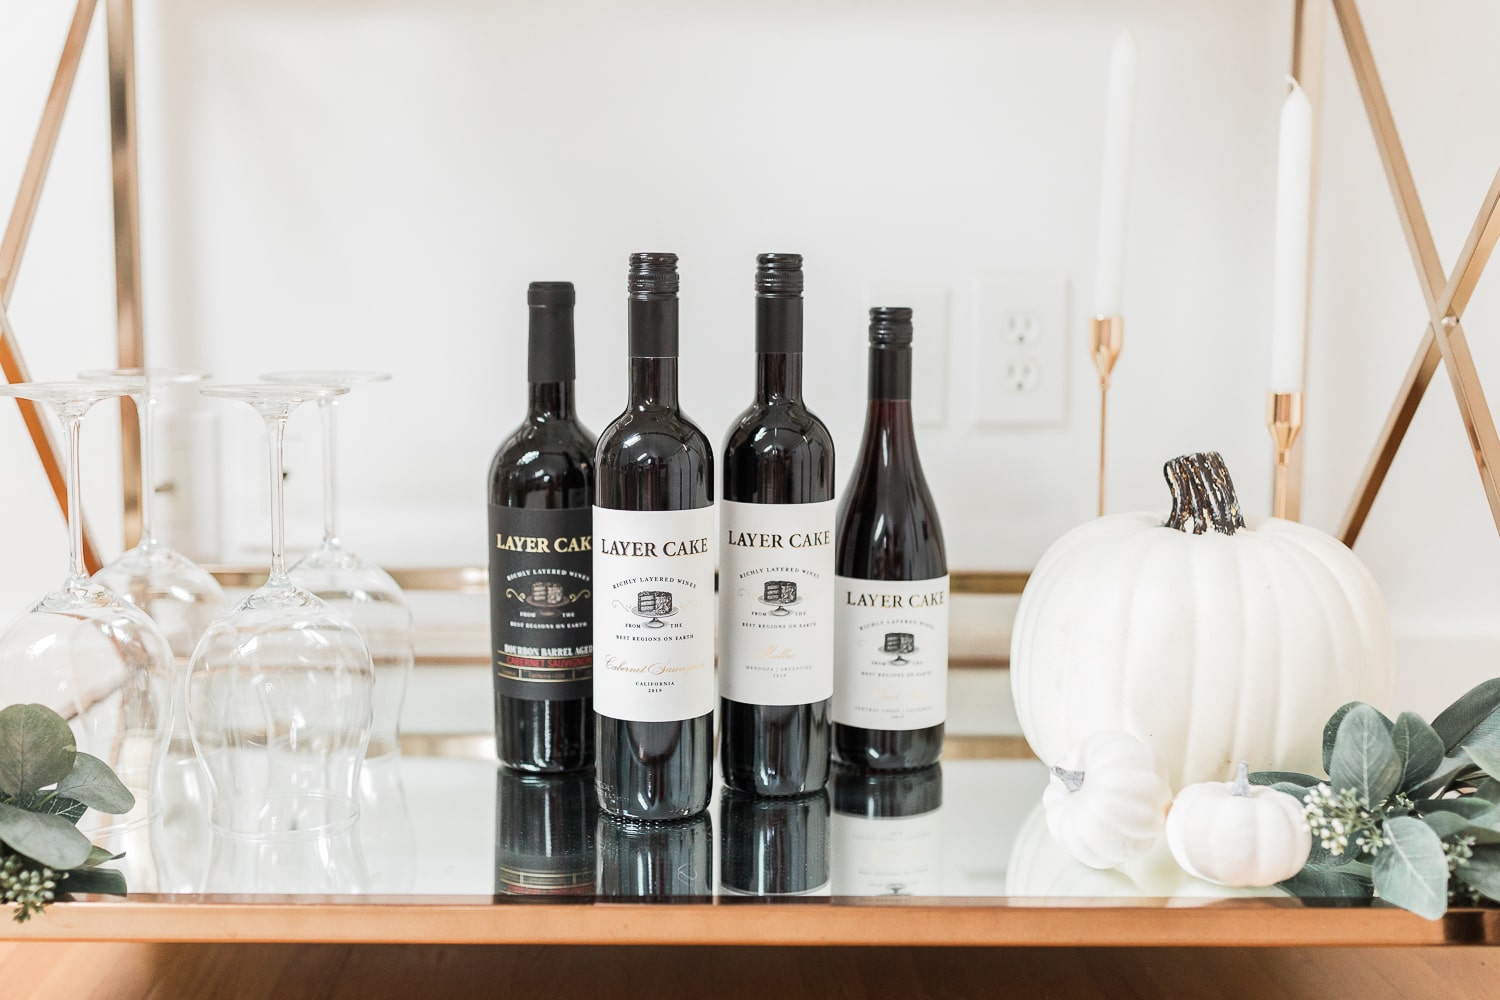 Layer Cake Cabernet Sauvignon, Layer Cake Malbec, Layer Cake Pinot Noir, and Layer Cake Bourbon Barrel Cabernet Sauvignon styled on a fall bar cart by blogger Stephanie Ziajka on Diary of a Debutante 